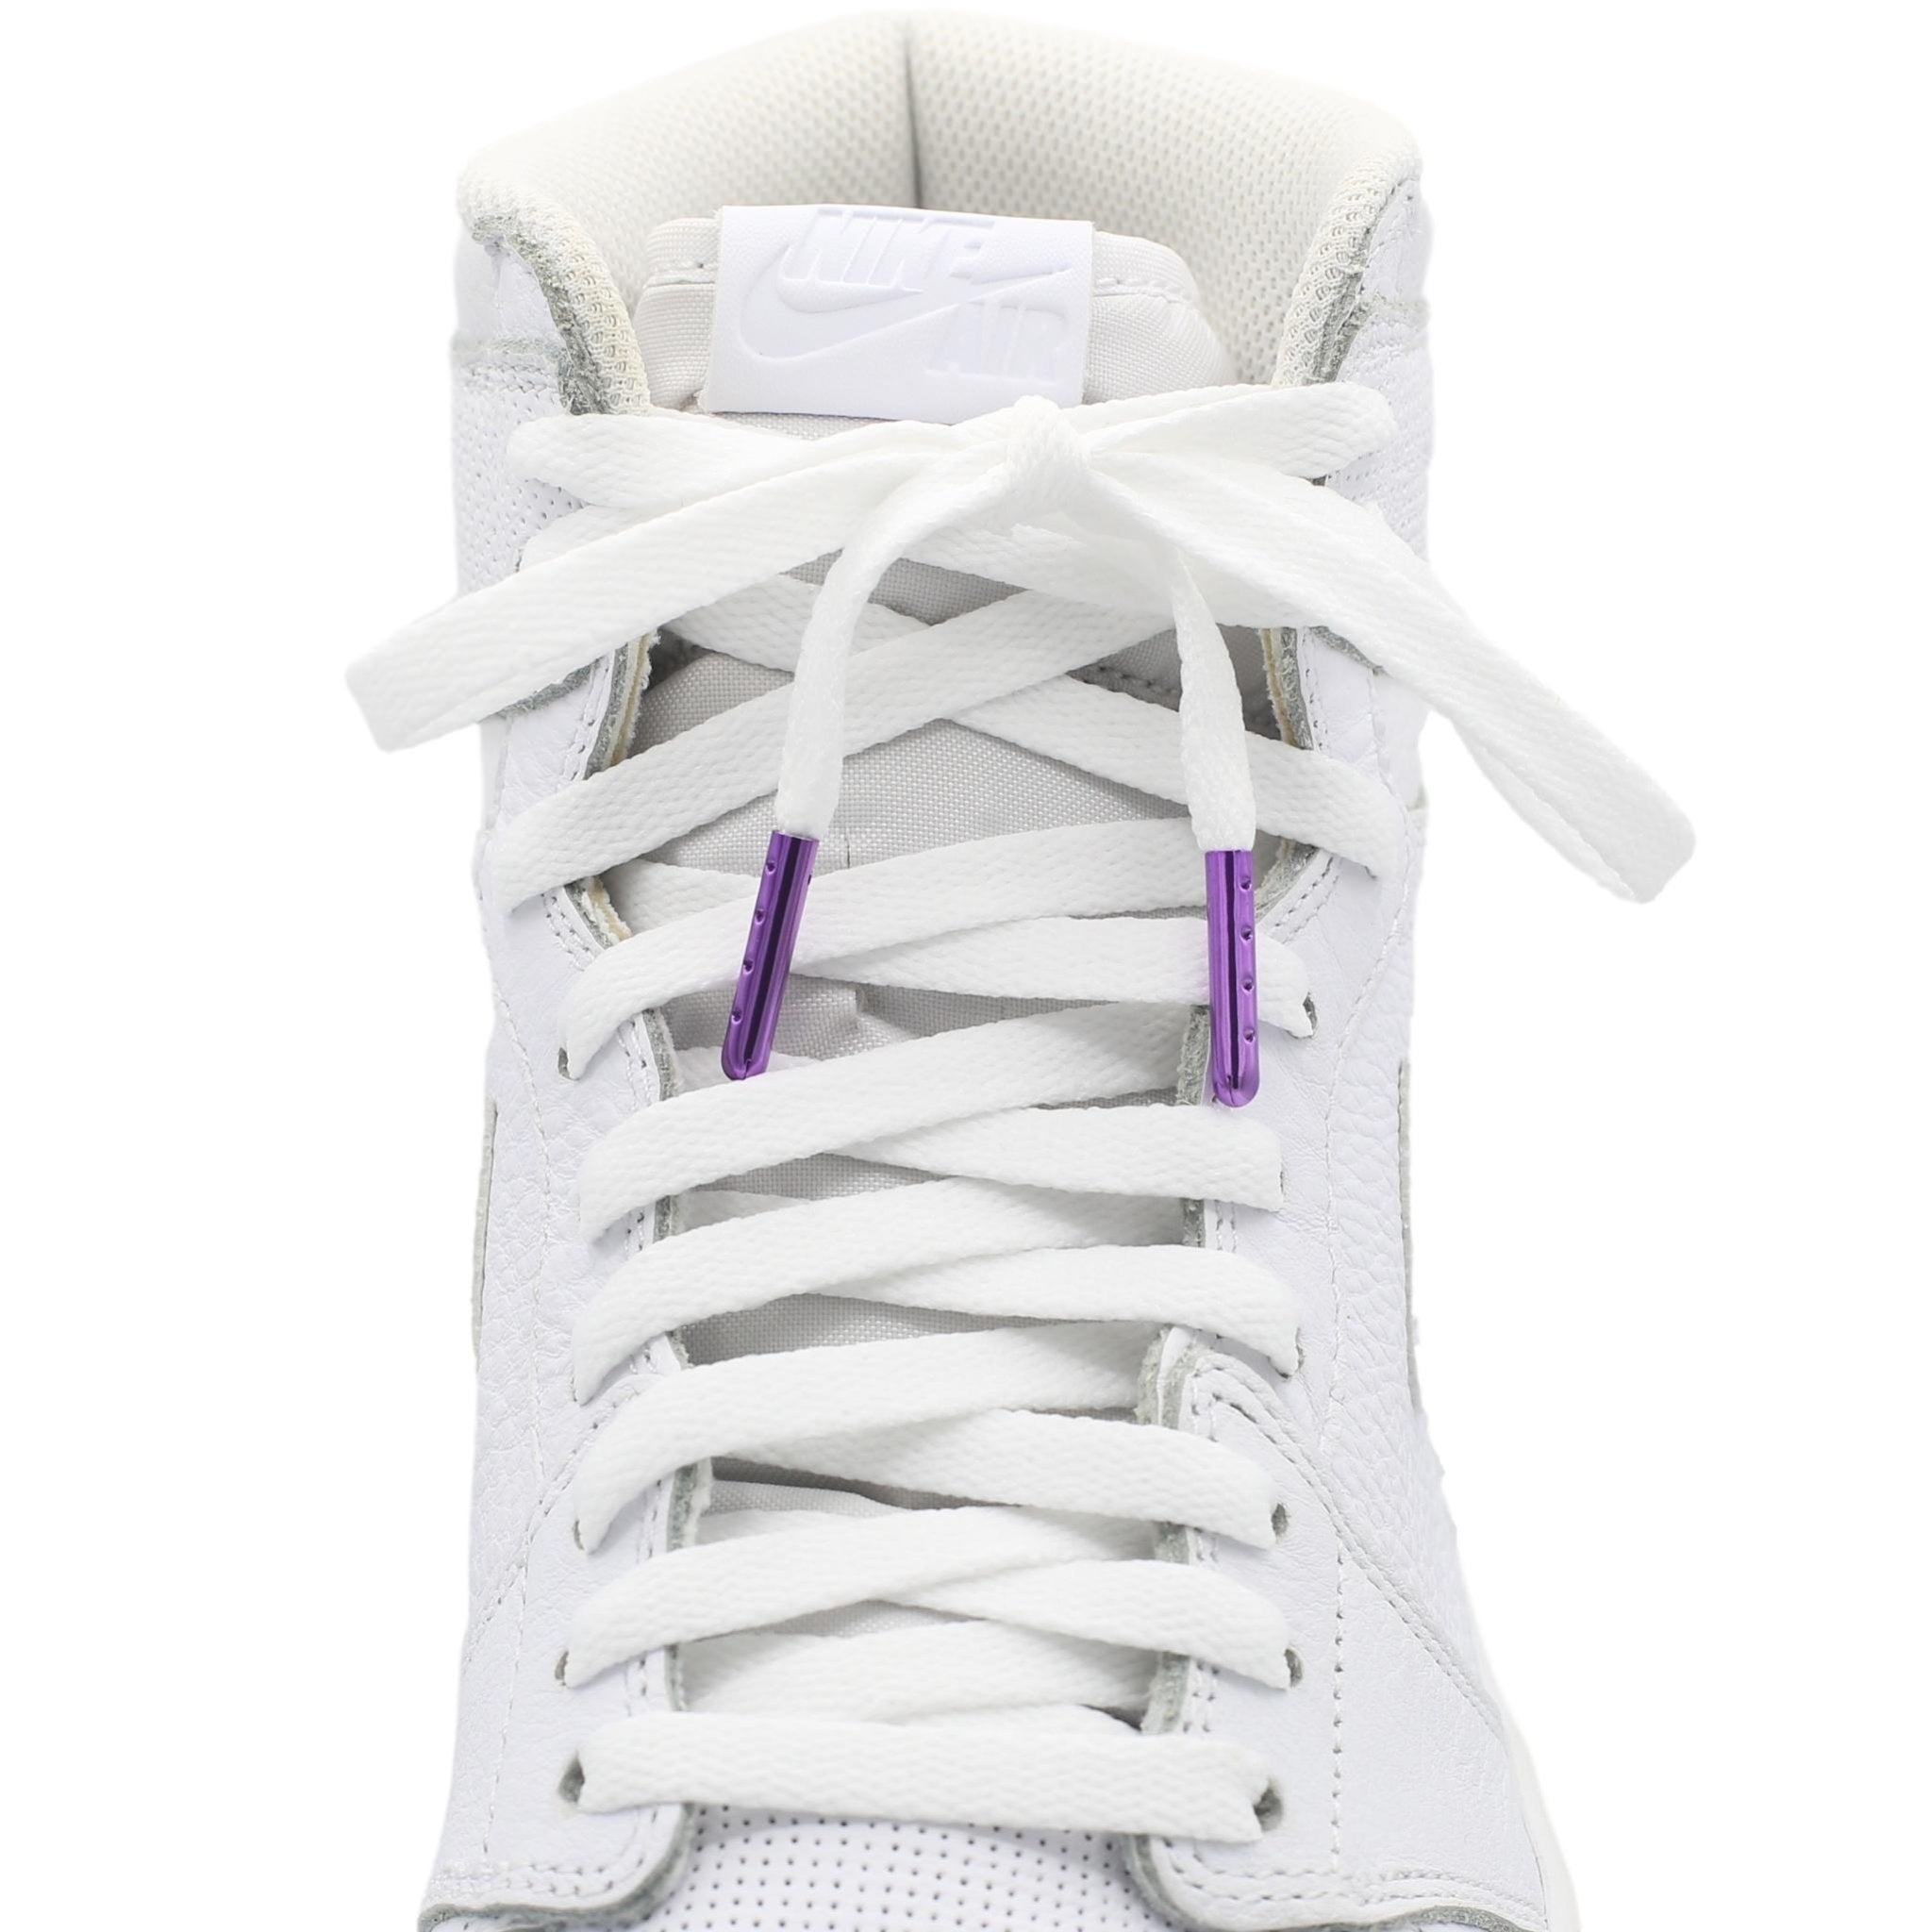 Thick Rope Laces 54 White Round Shoelaces for Sneakers Jordan IX